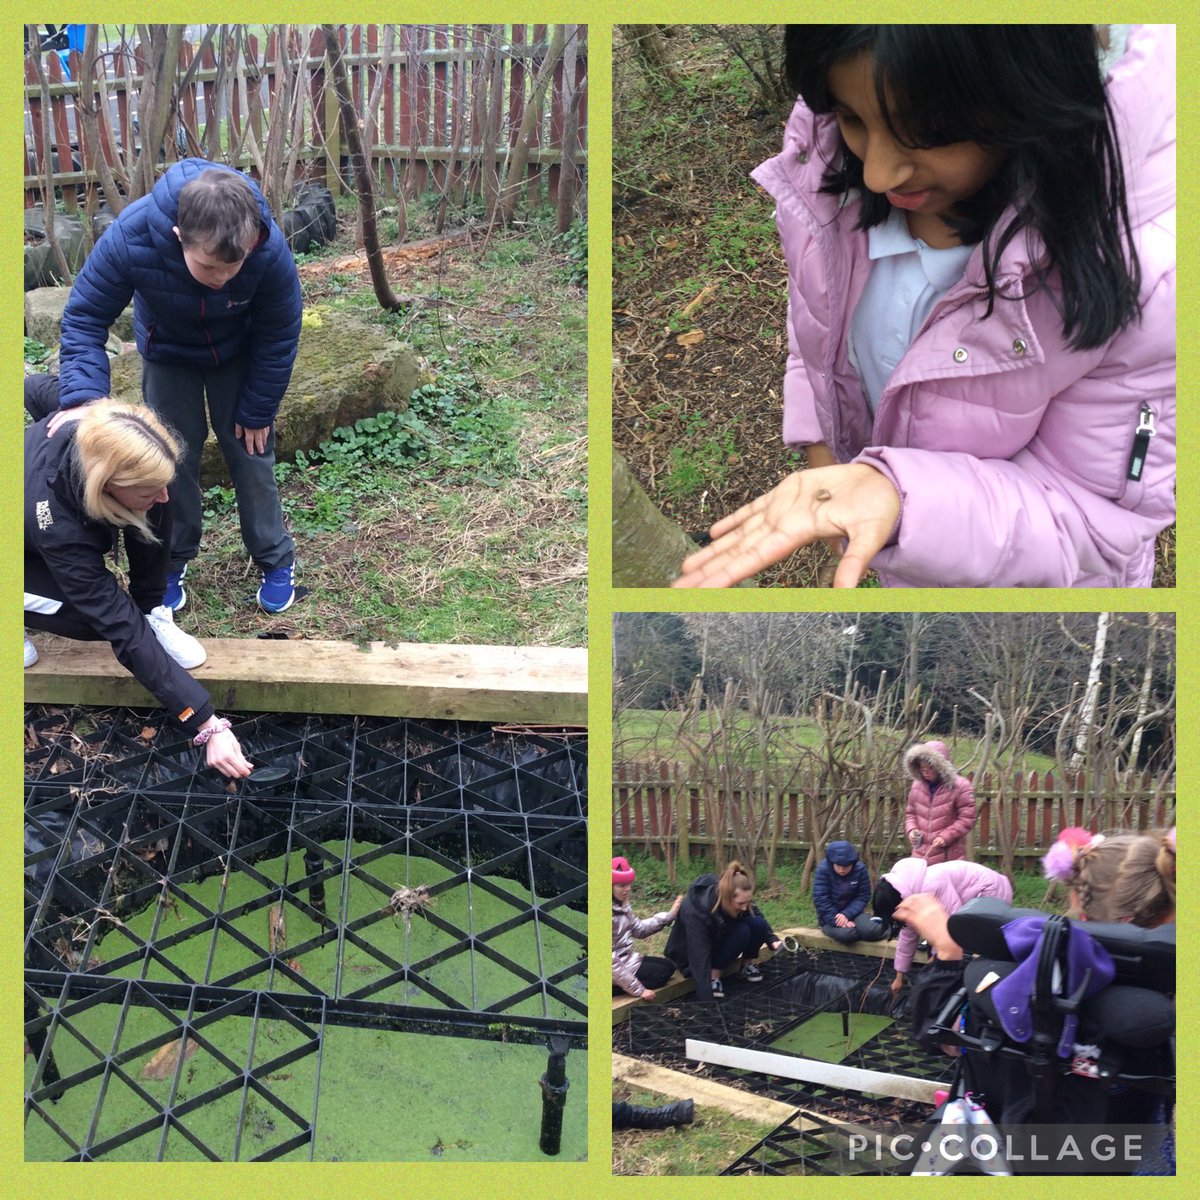 Hawthorn class have had a great time exploring the #forestschool area of the Lea, hunting for bugs & frogs in the pond. Everyone loved looking through magnifying glasses to examine what we found; worms, ants, woodlice & slugs! 🐌 🐜 🪱@ForestSchoolsUK @ForestSchools #gooutside